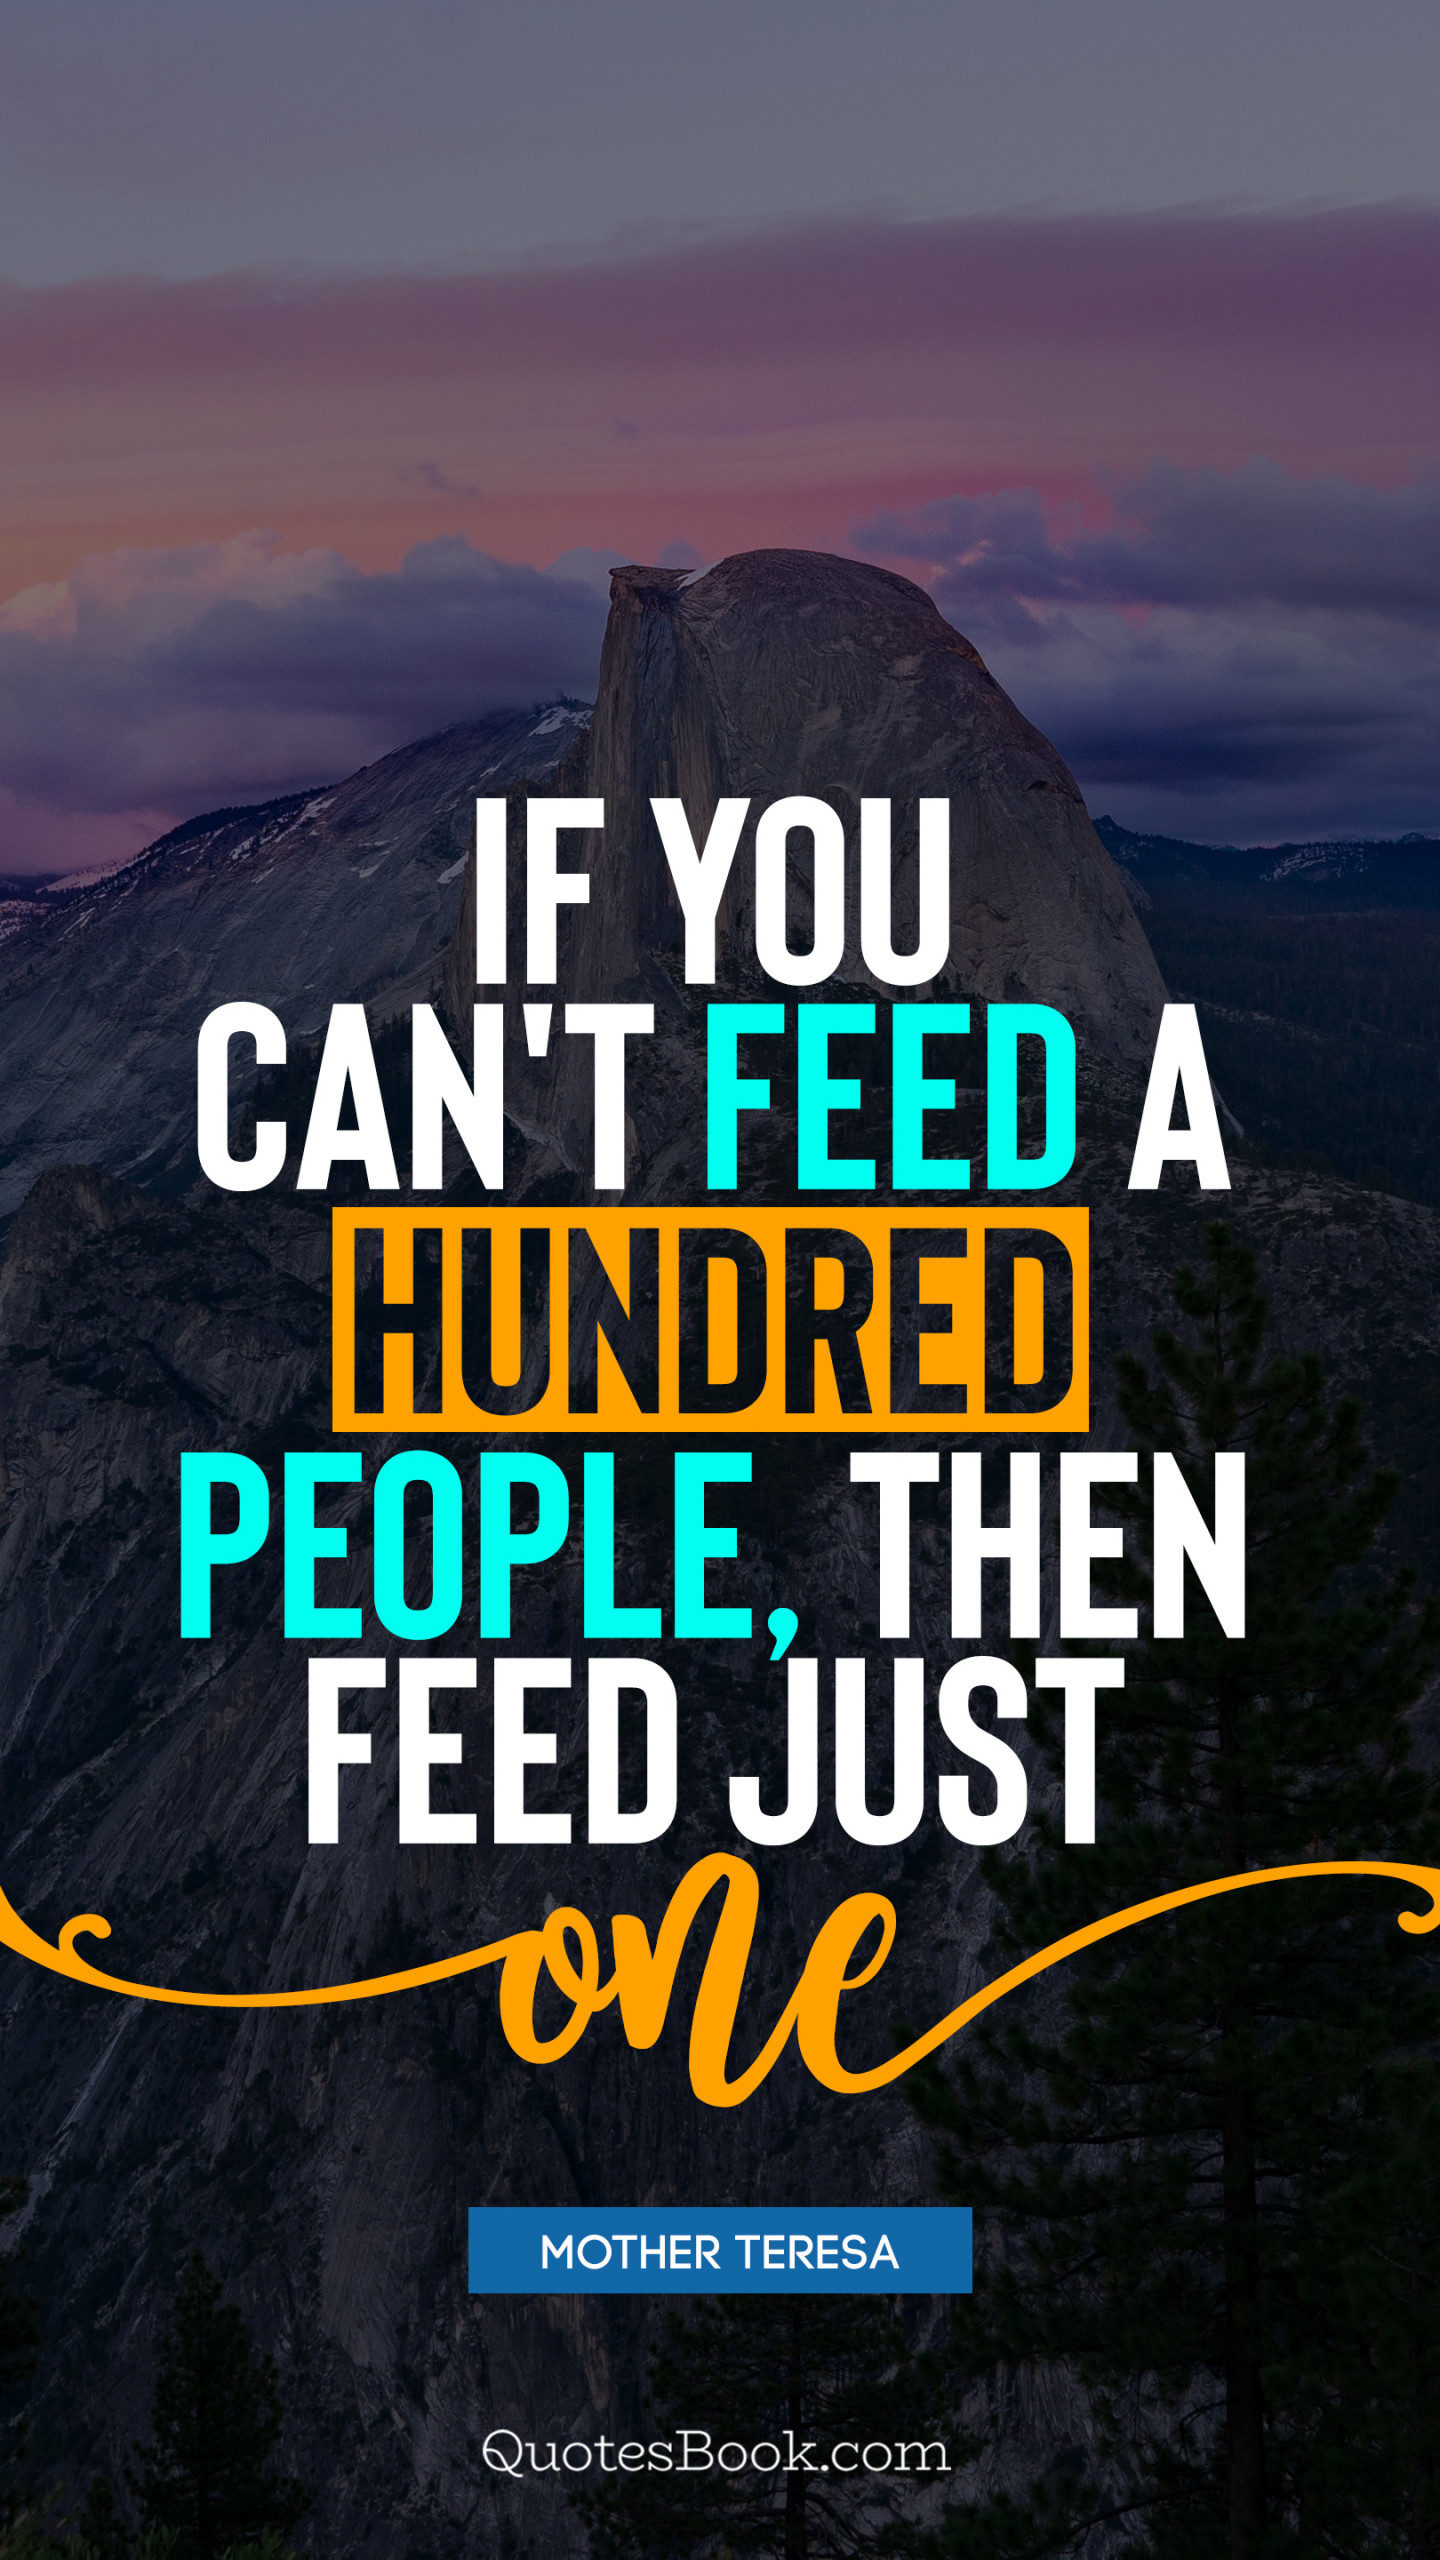 If you can't feed a hundred people, then feed just one